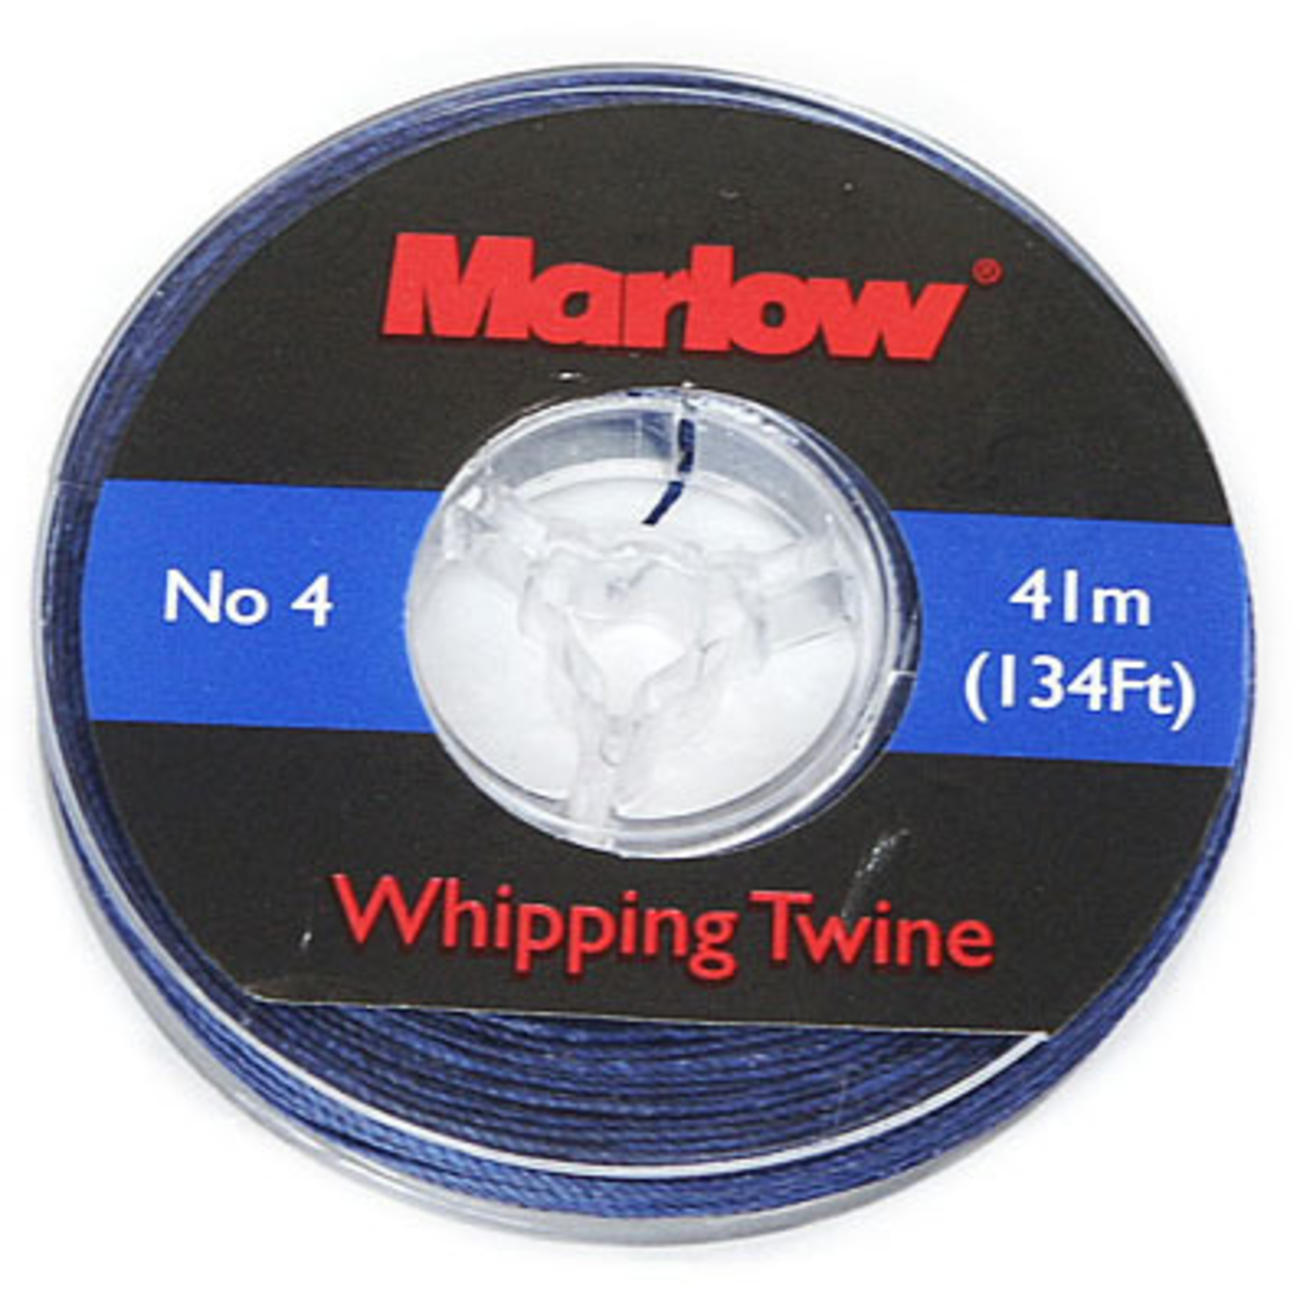 Whipping Twine No.4カラー / 1ケース 12個入り